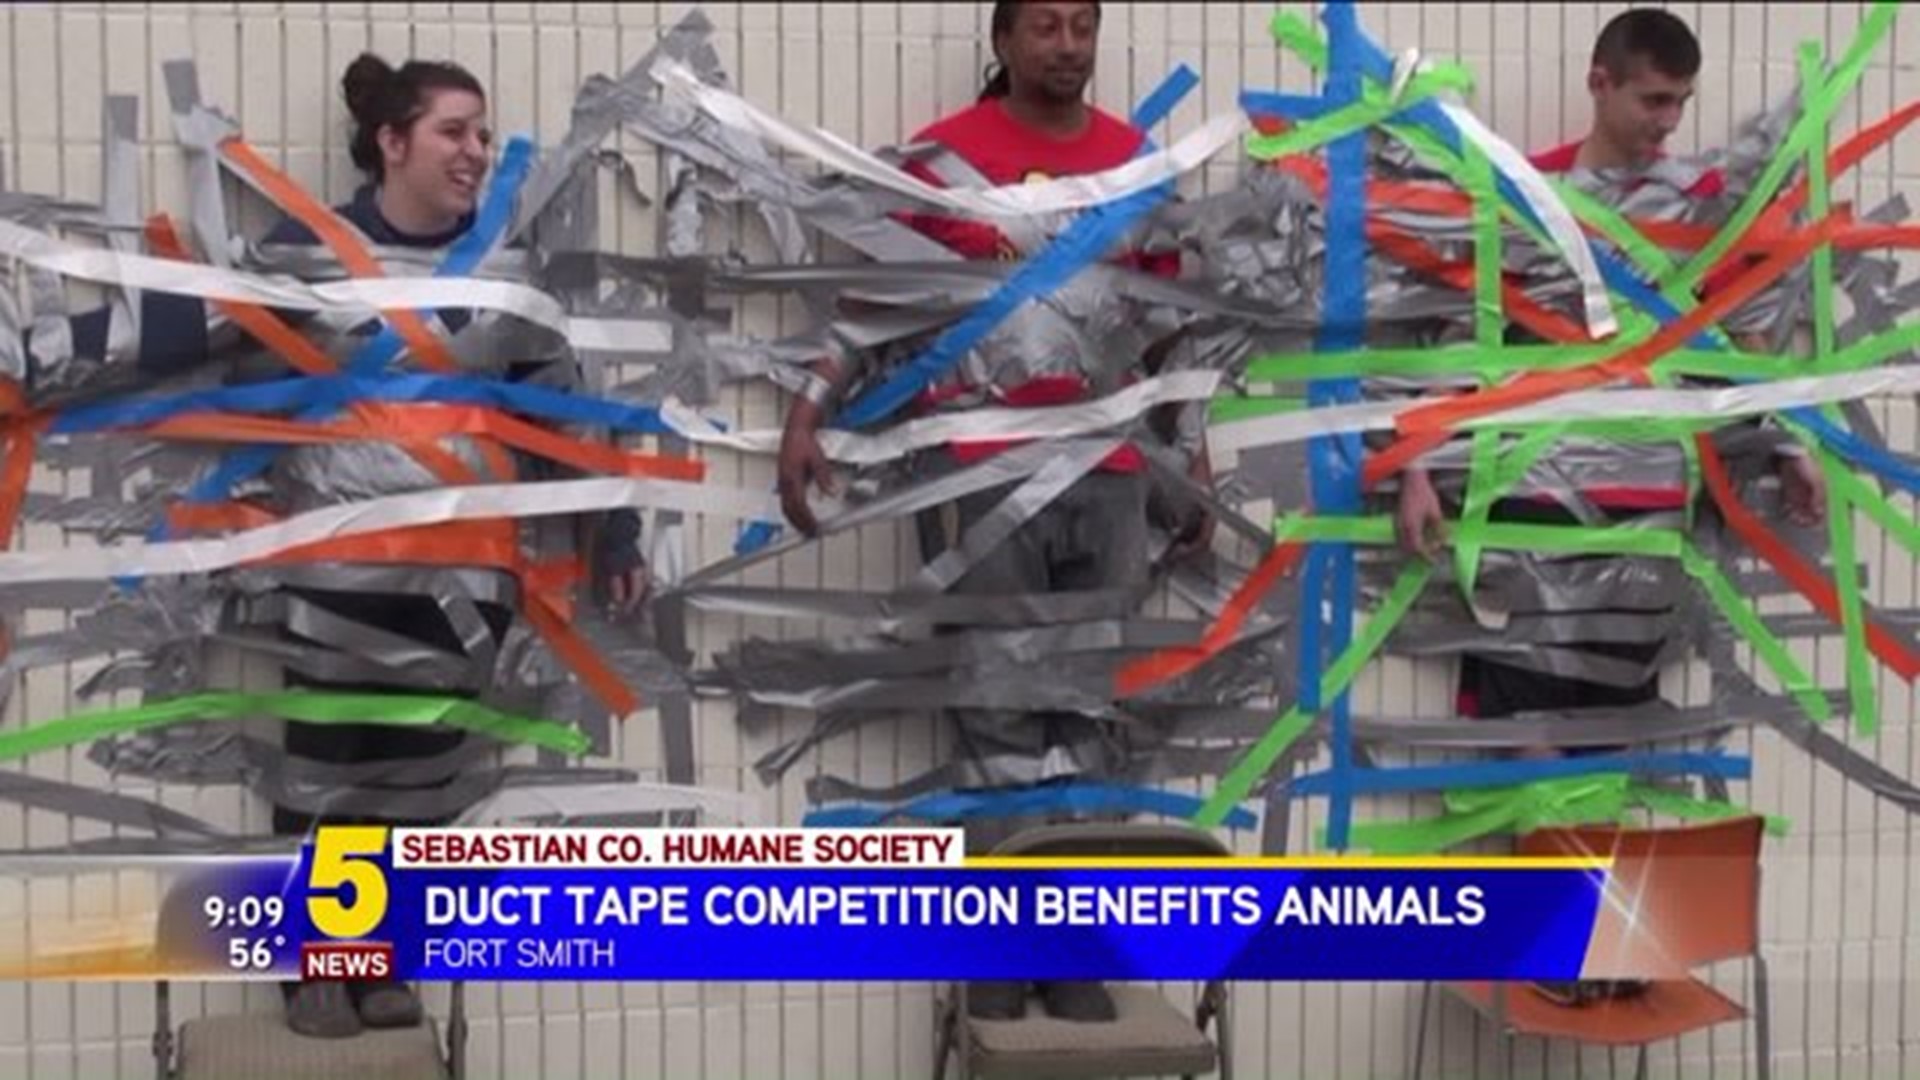 When Duct Tape Benefits Animals